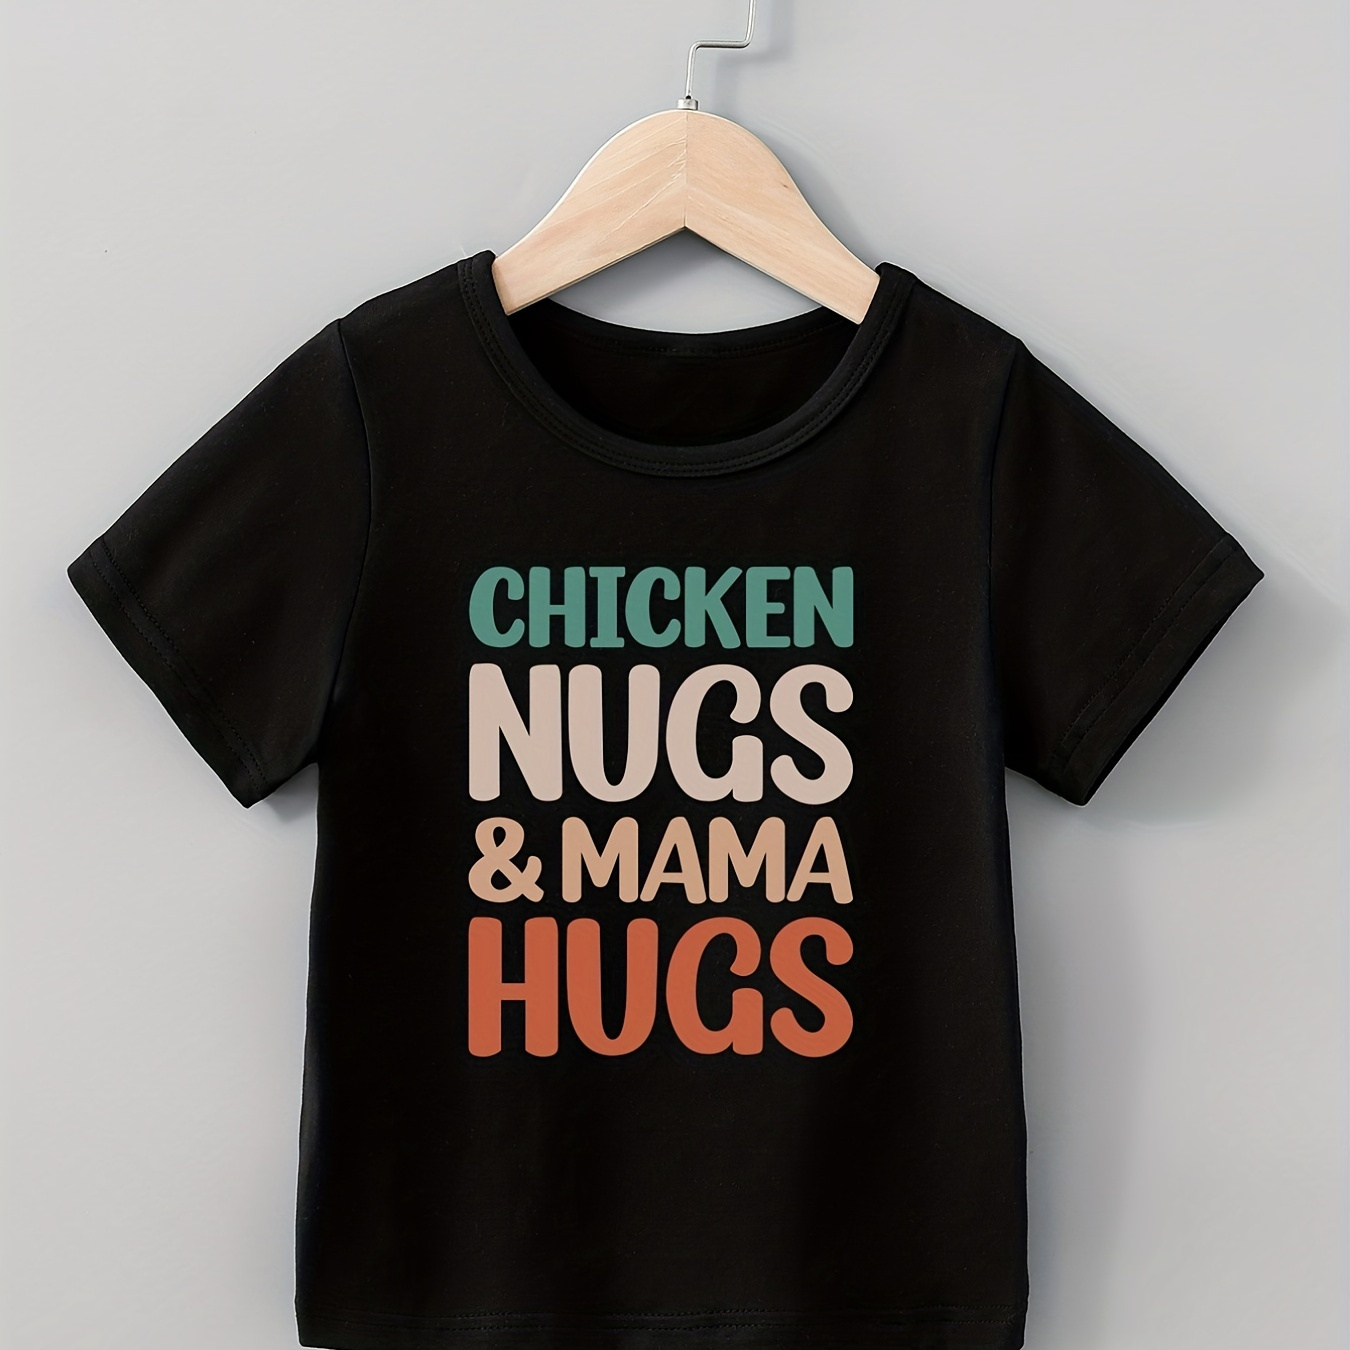 

Rainbow Chicken Nugs And Mama Hugs Letter Print Boys Creative T-shirt, Casual Lightweight Comfy Short Sleeve Crew Neck Tee Tops, Kids Clothings For Summer